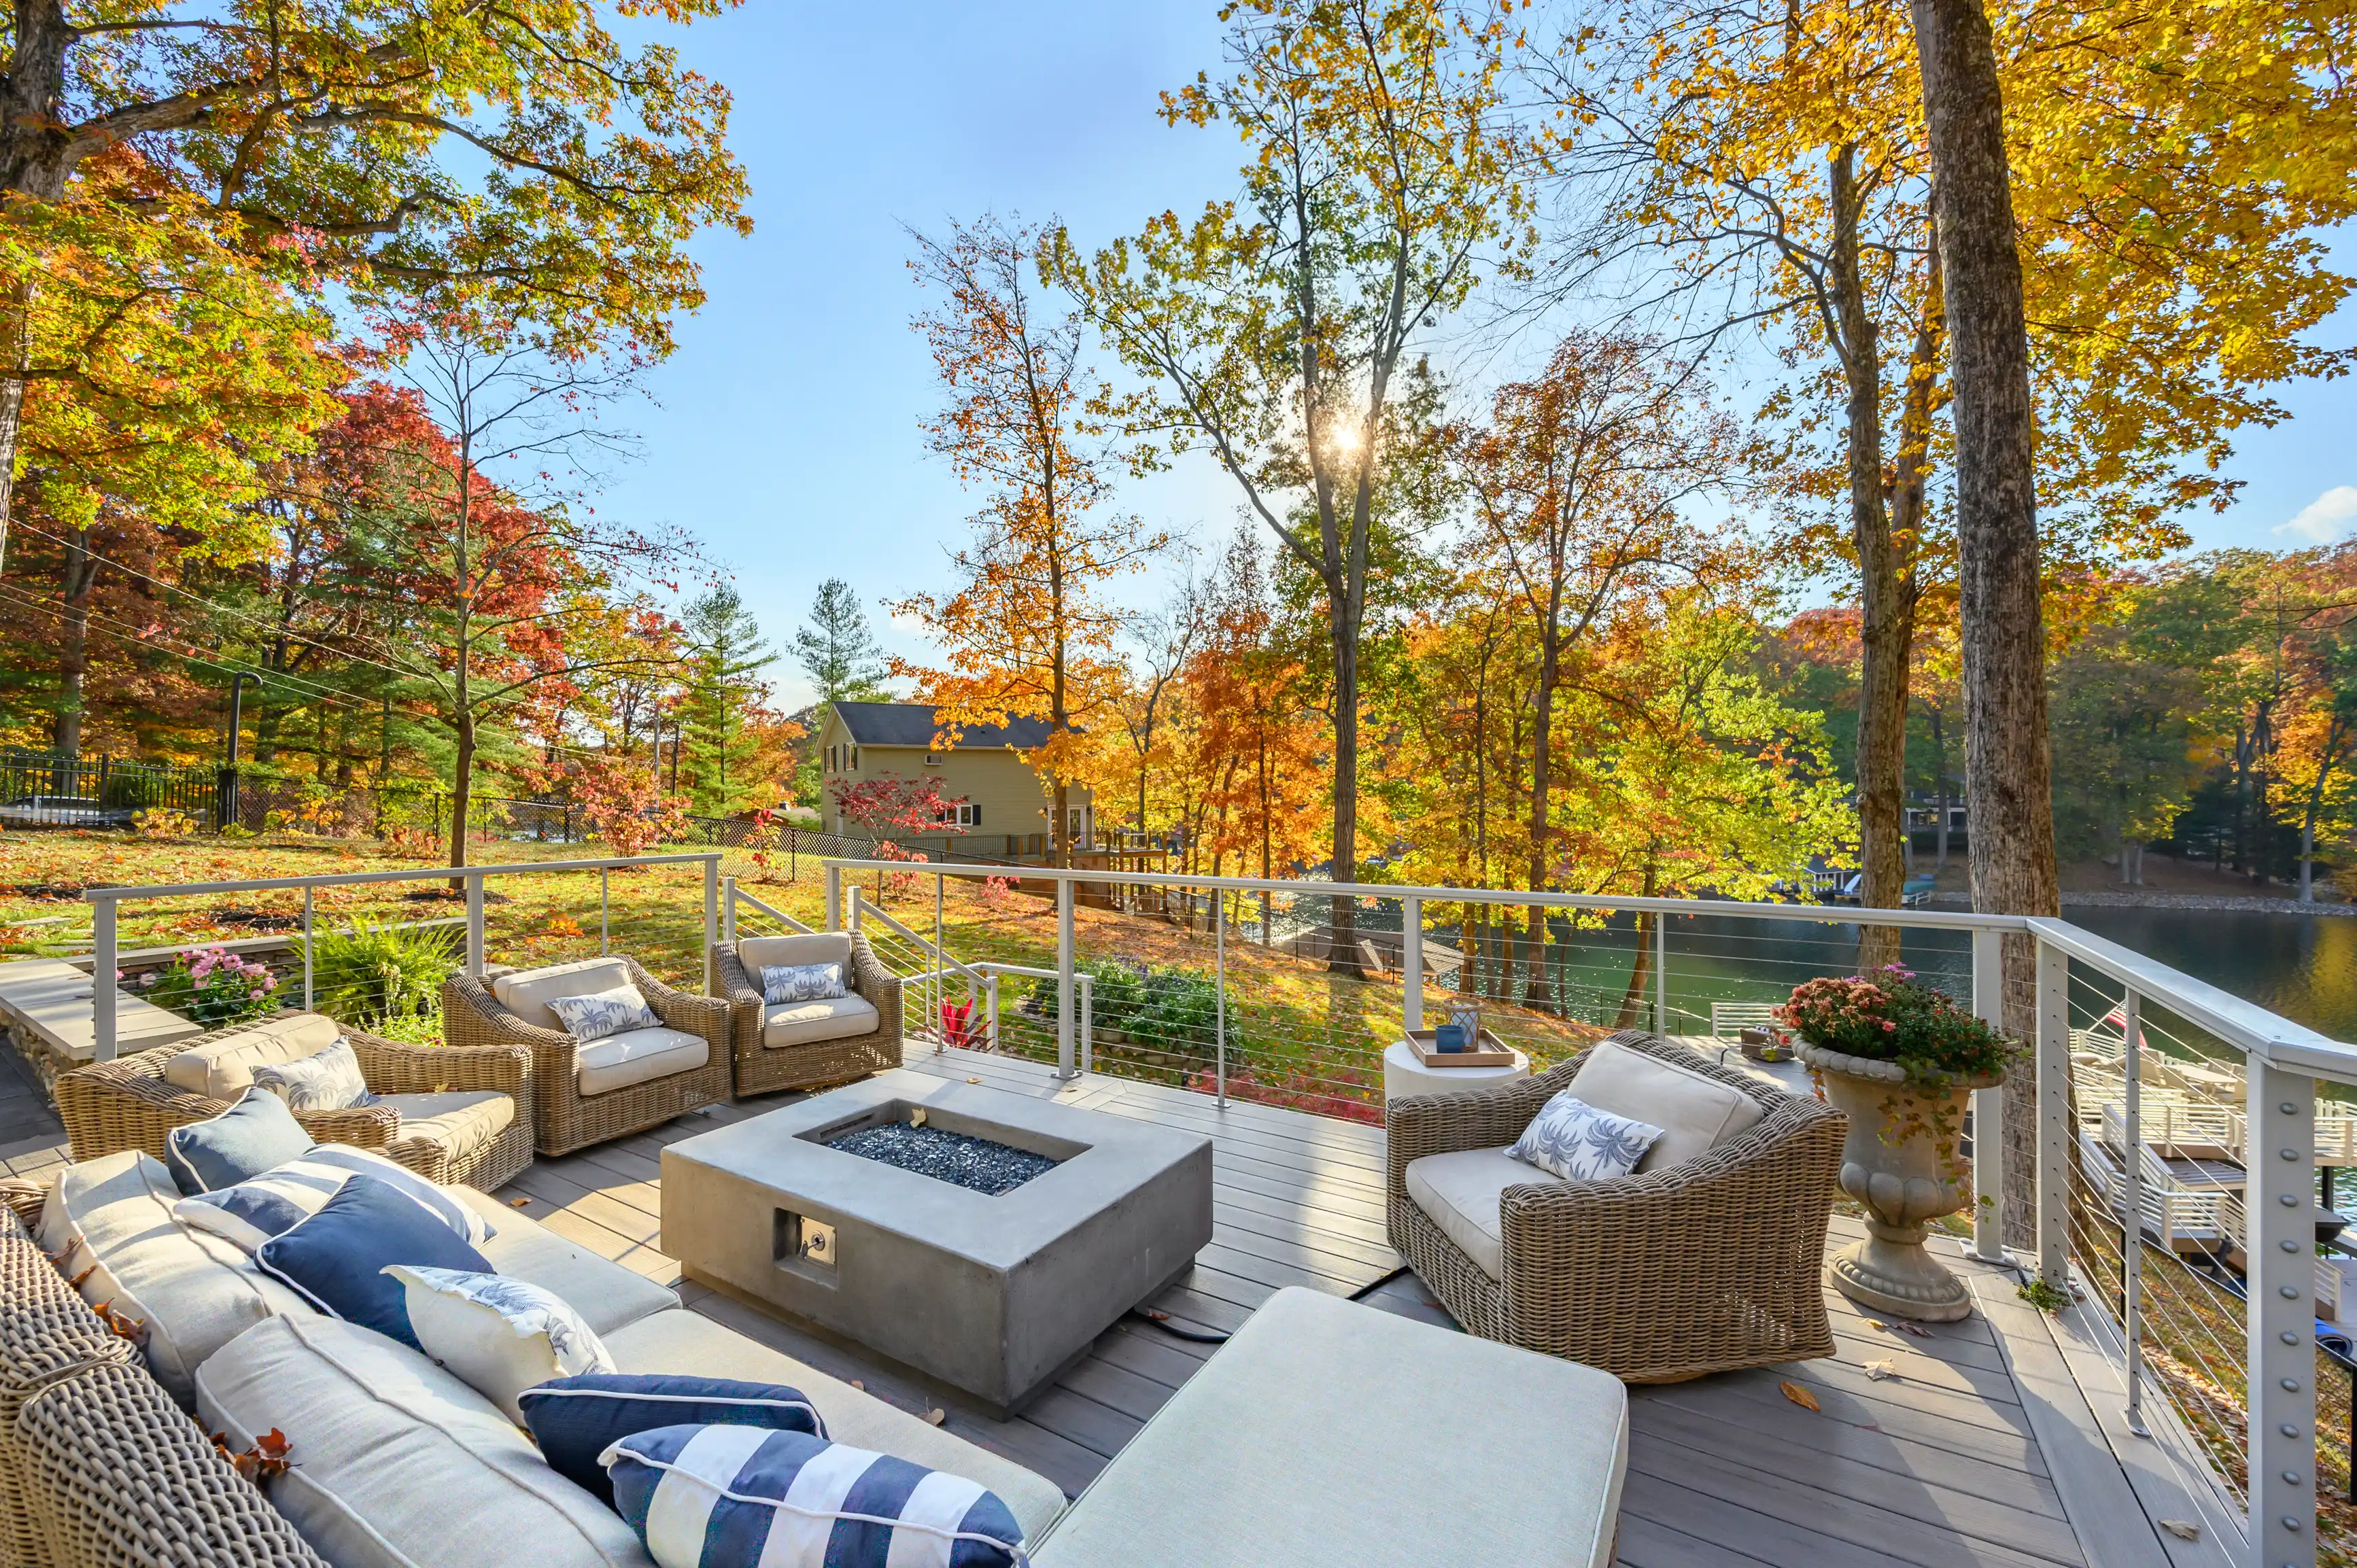 A cozy outdoor patio with wicker furniture overlooking a serene lake surrounded by trees with autumn foliage.